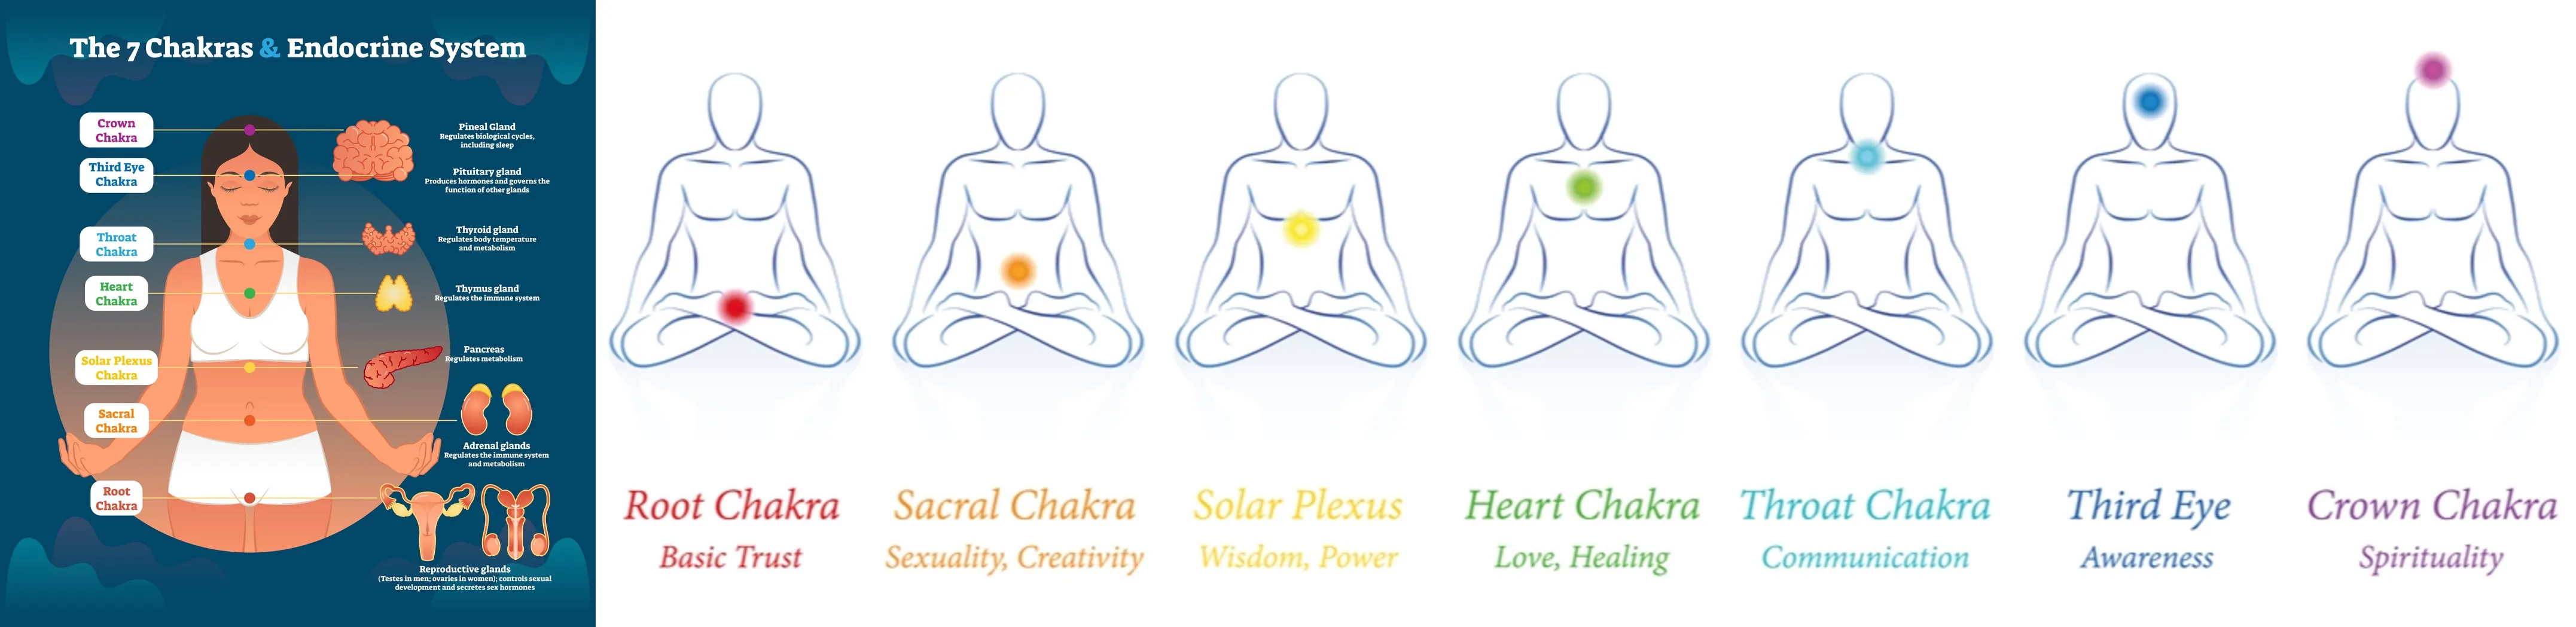 The 7 Chakras (Energy Centers) and Endocrine system organs represent respective influential emotions. (The emotional settings I brought are slightly broader.)